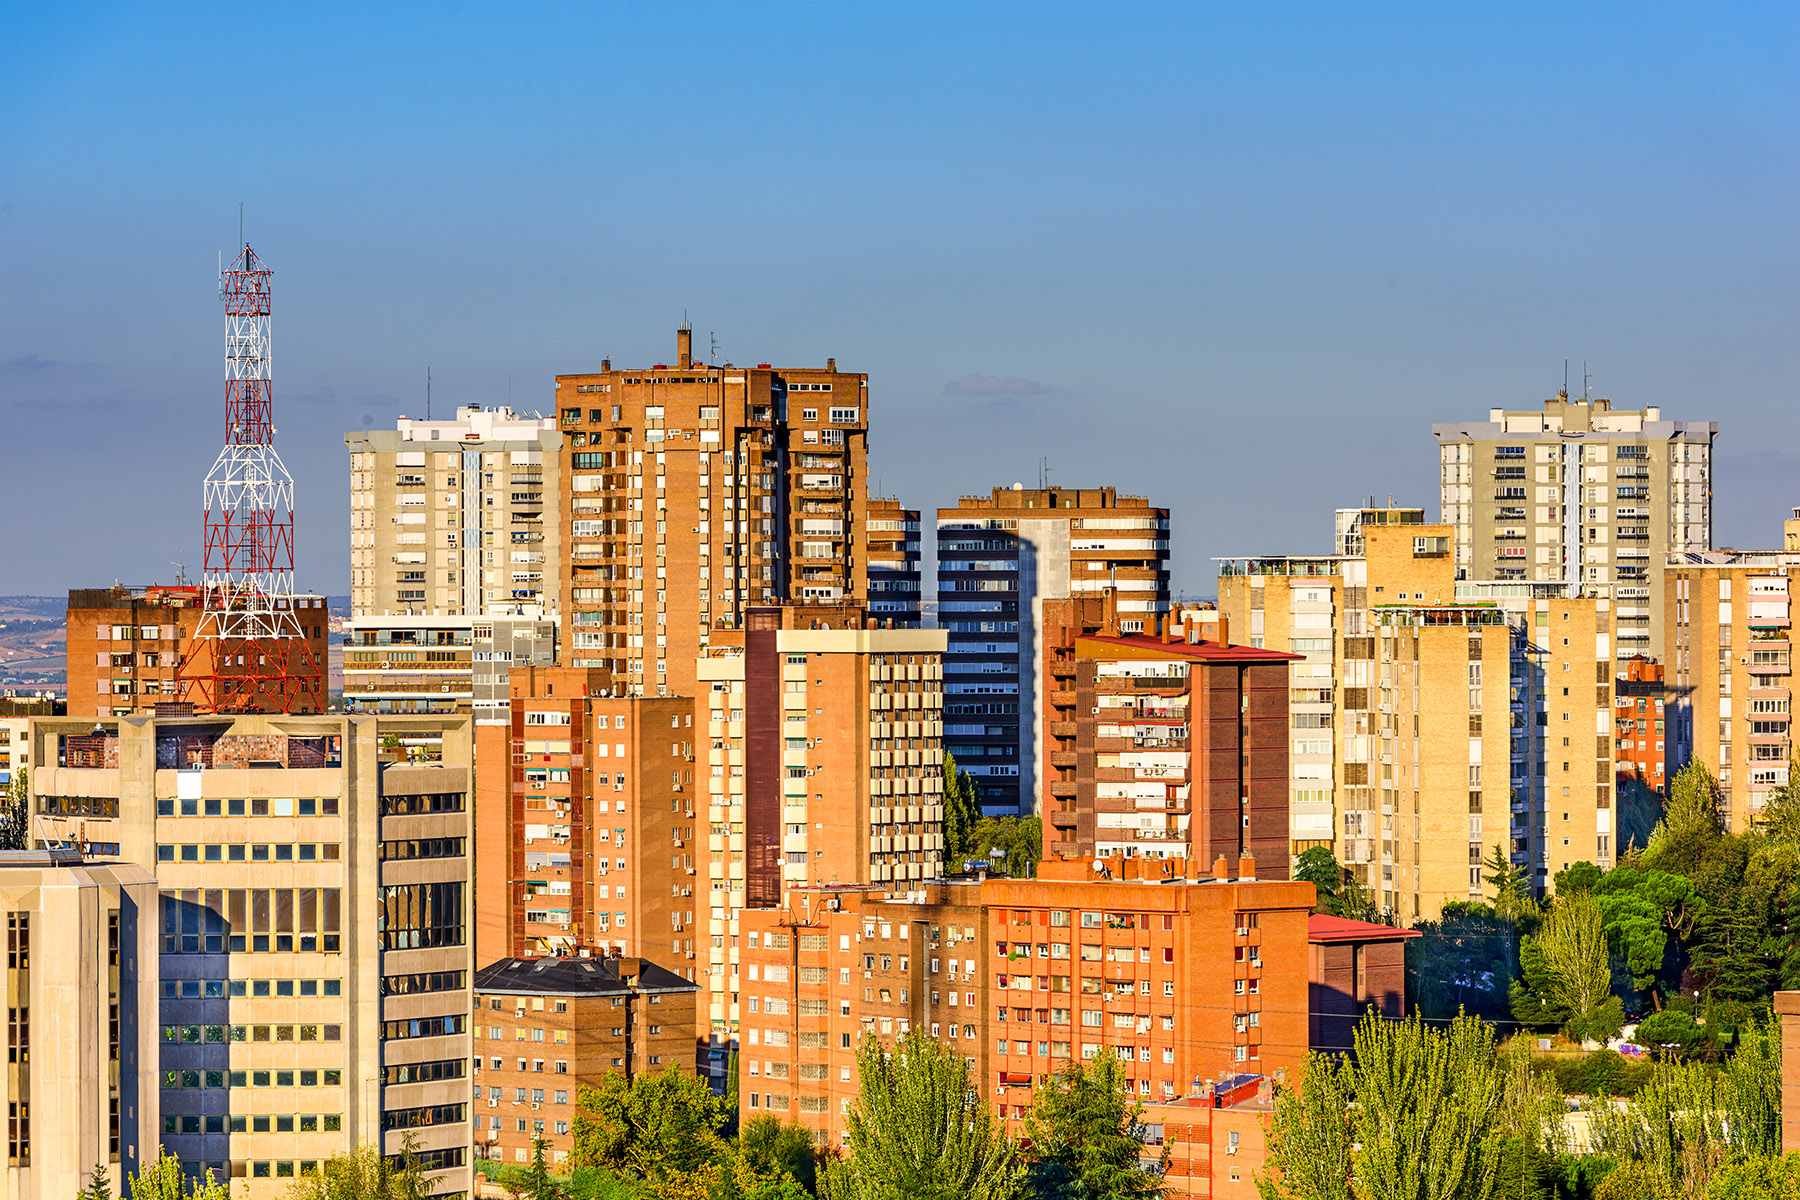 Apartment buildings in Chamartín, Madrid